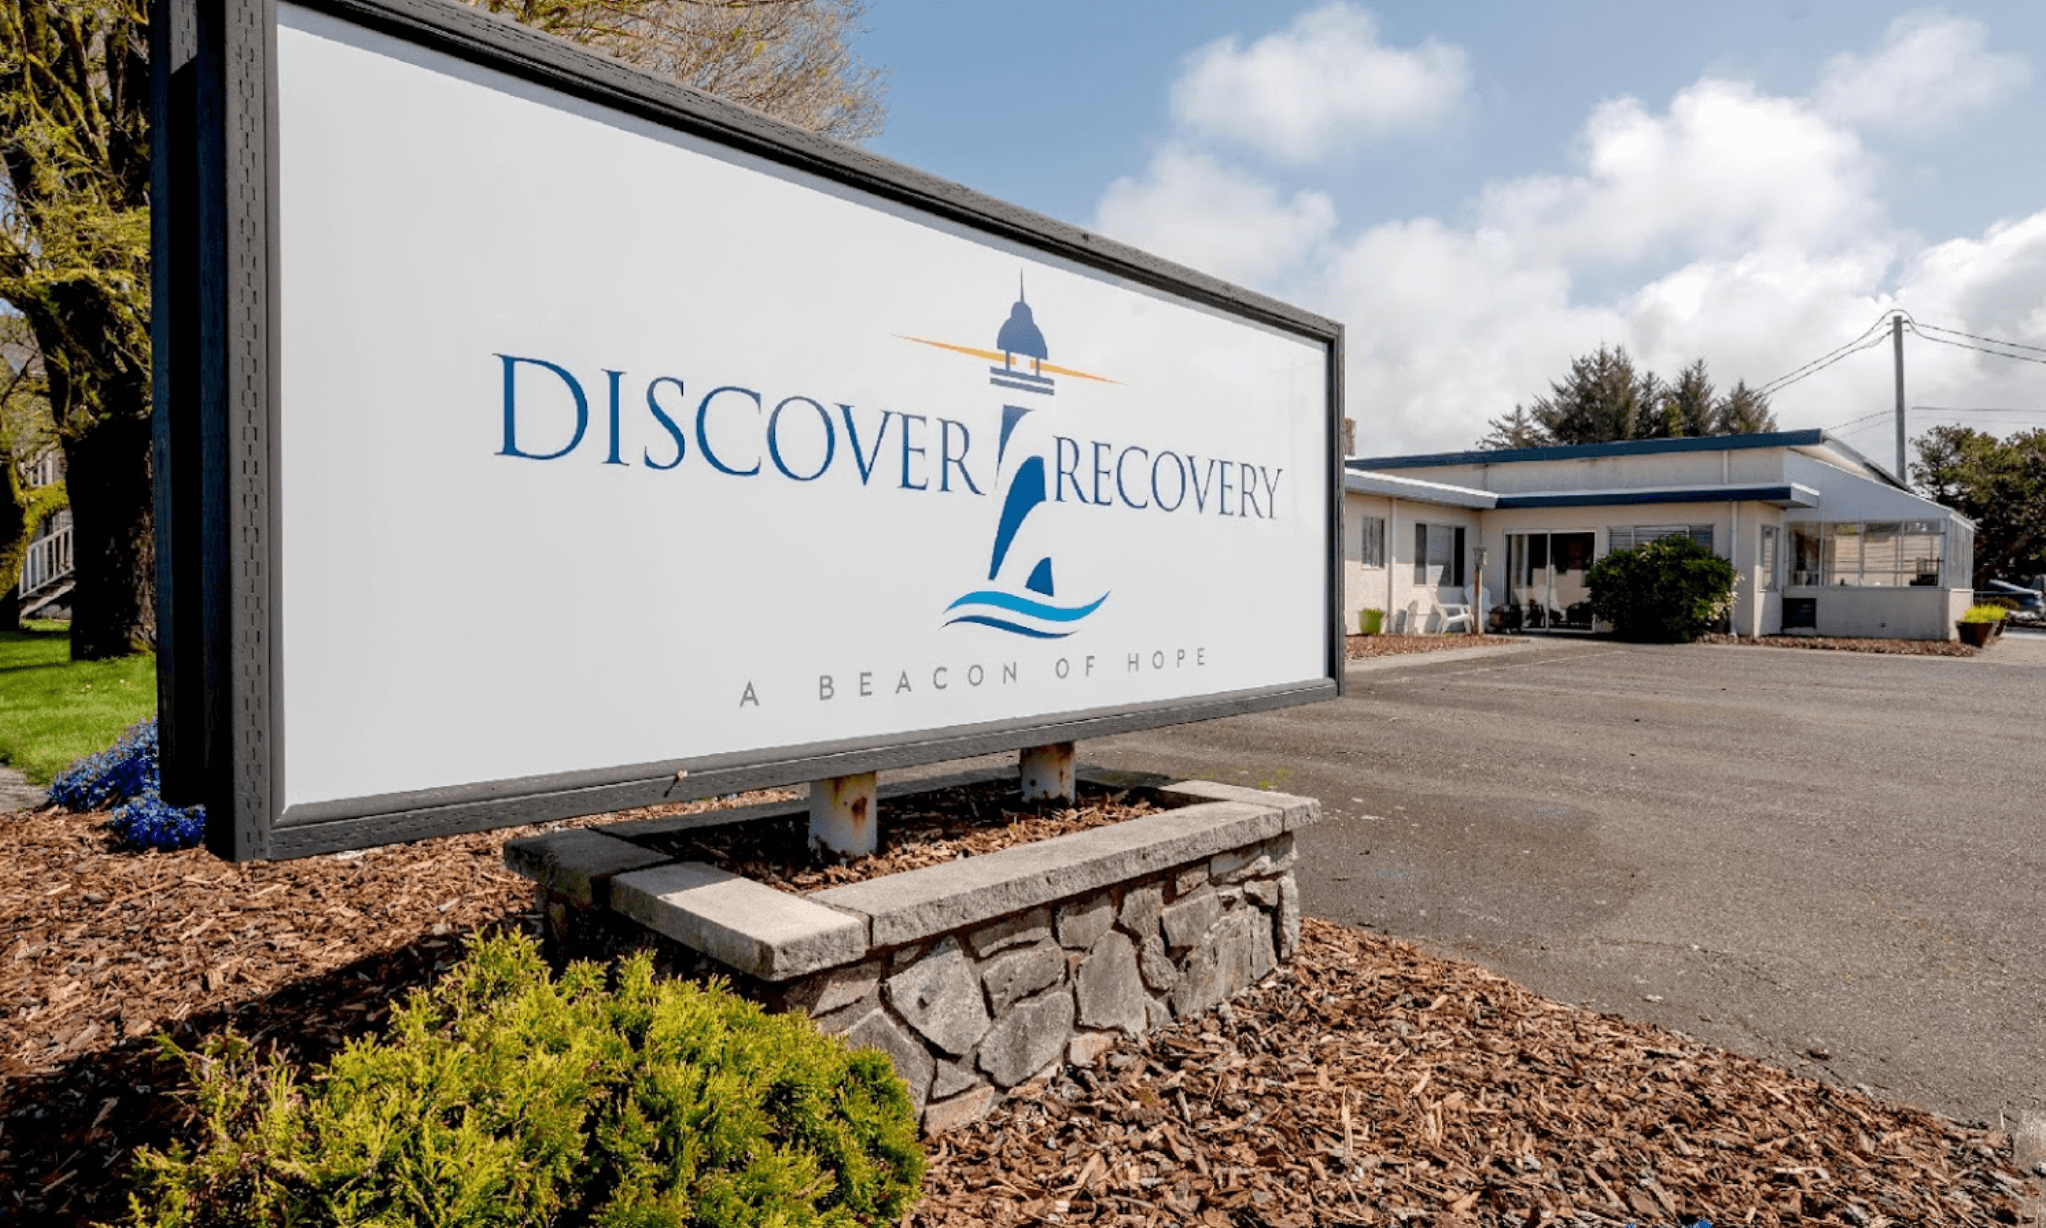 Discover Recovery